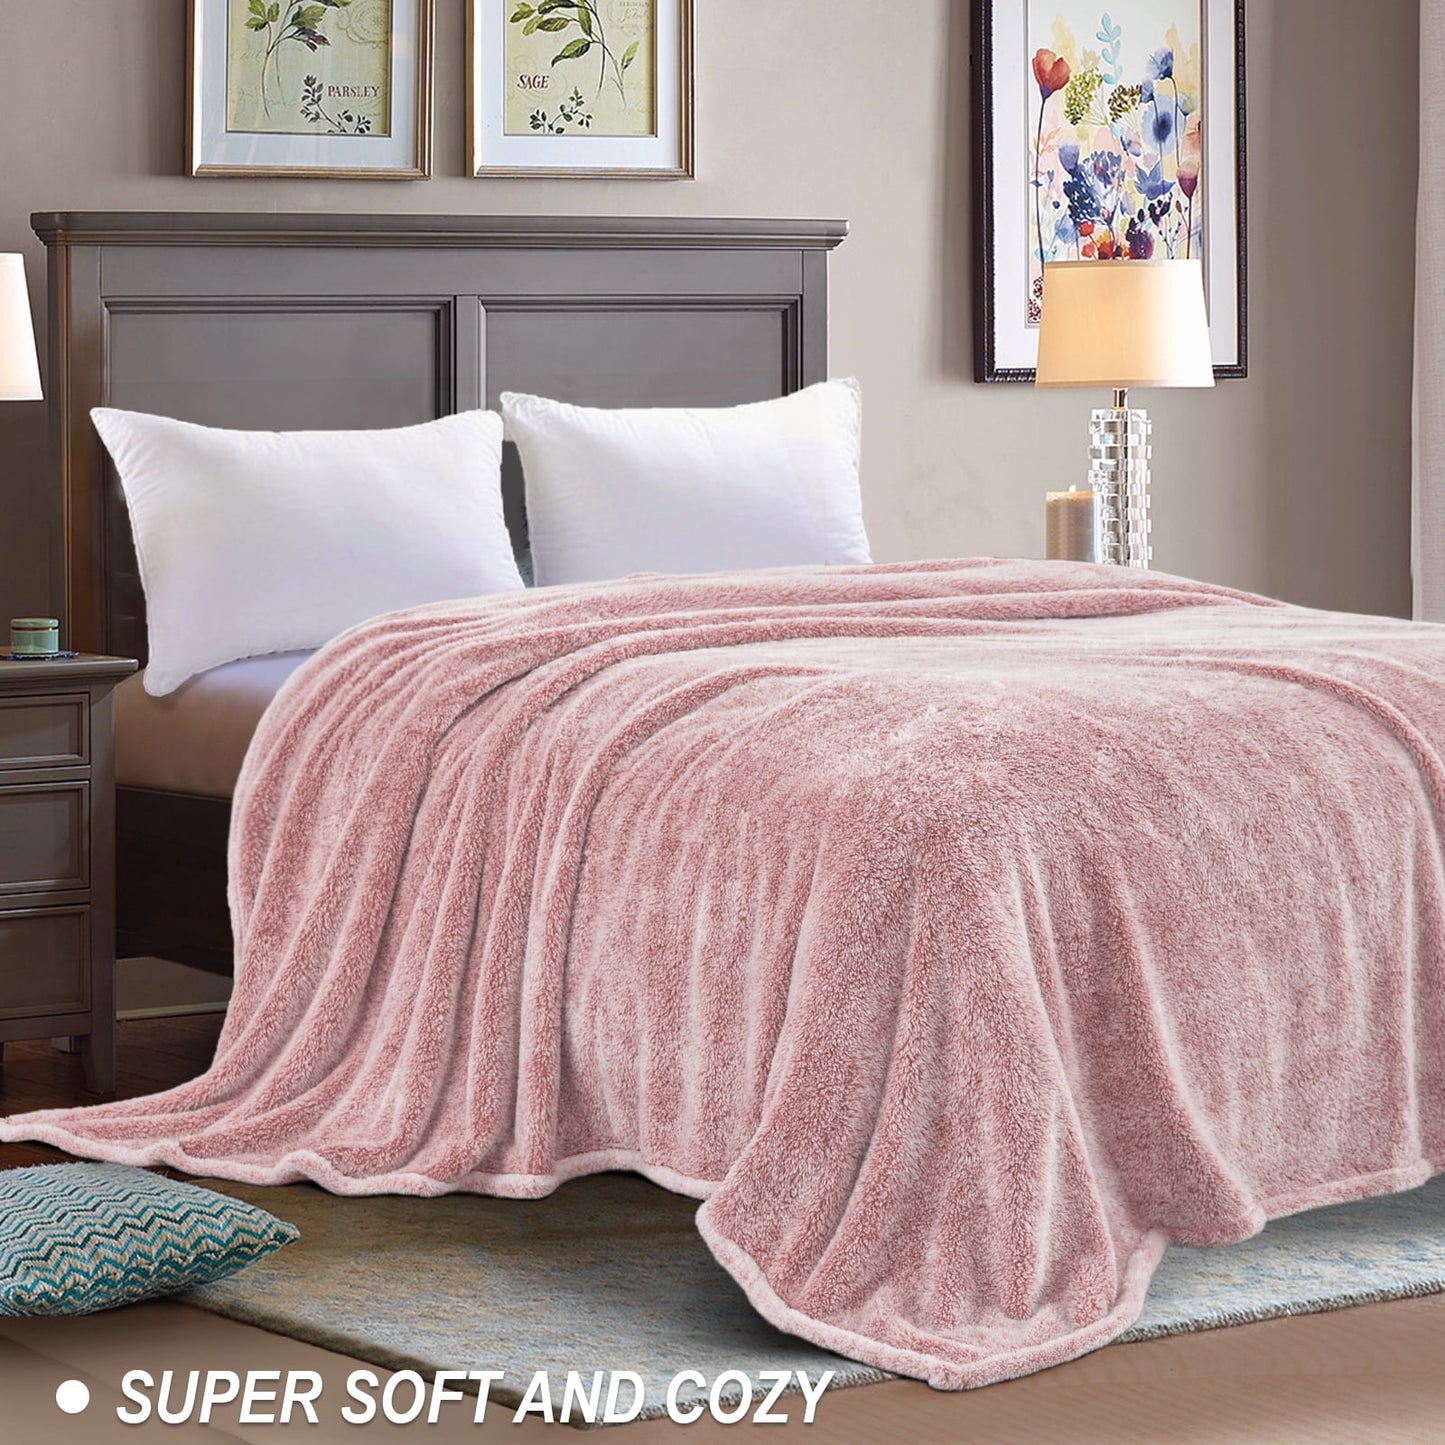 Exclusivo Mezcla Plush Fuzzy Fleece Queen Size Bed Blanket, Super Soft Fluffy and Thick Blankets for Travel Bed and Couch (Mixed Pink, 90x90 inches)